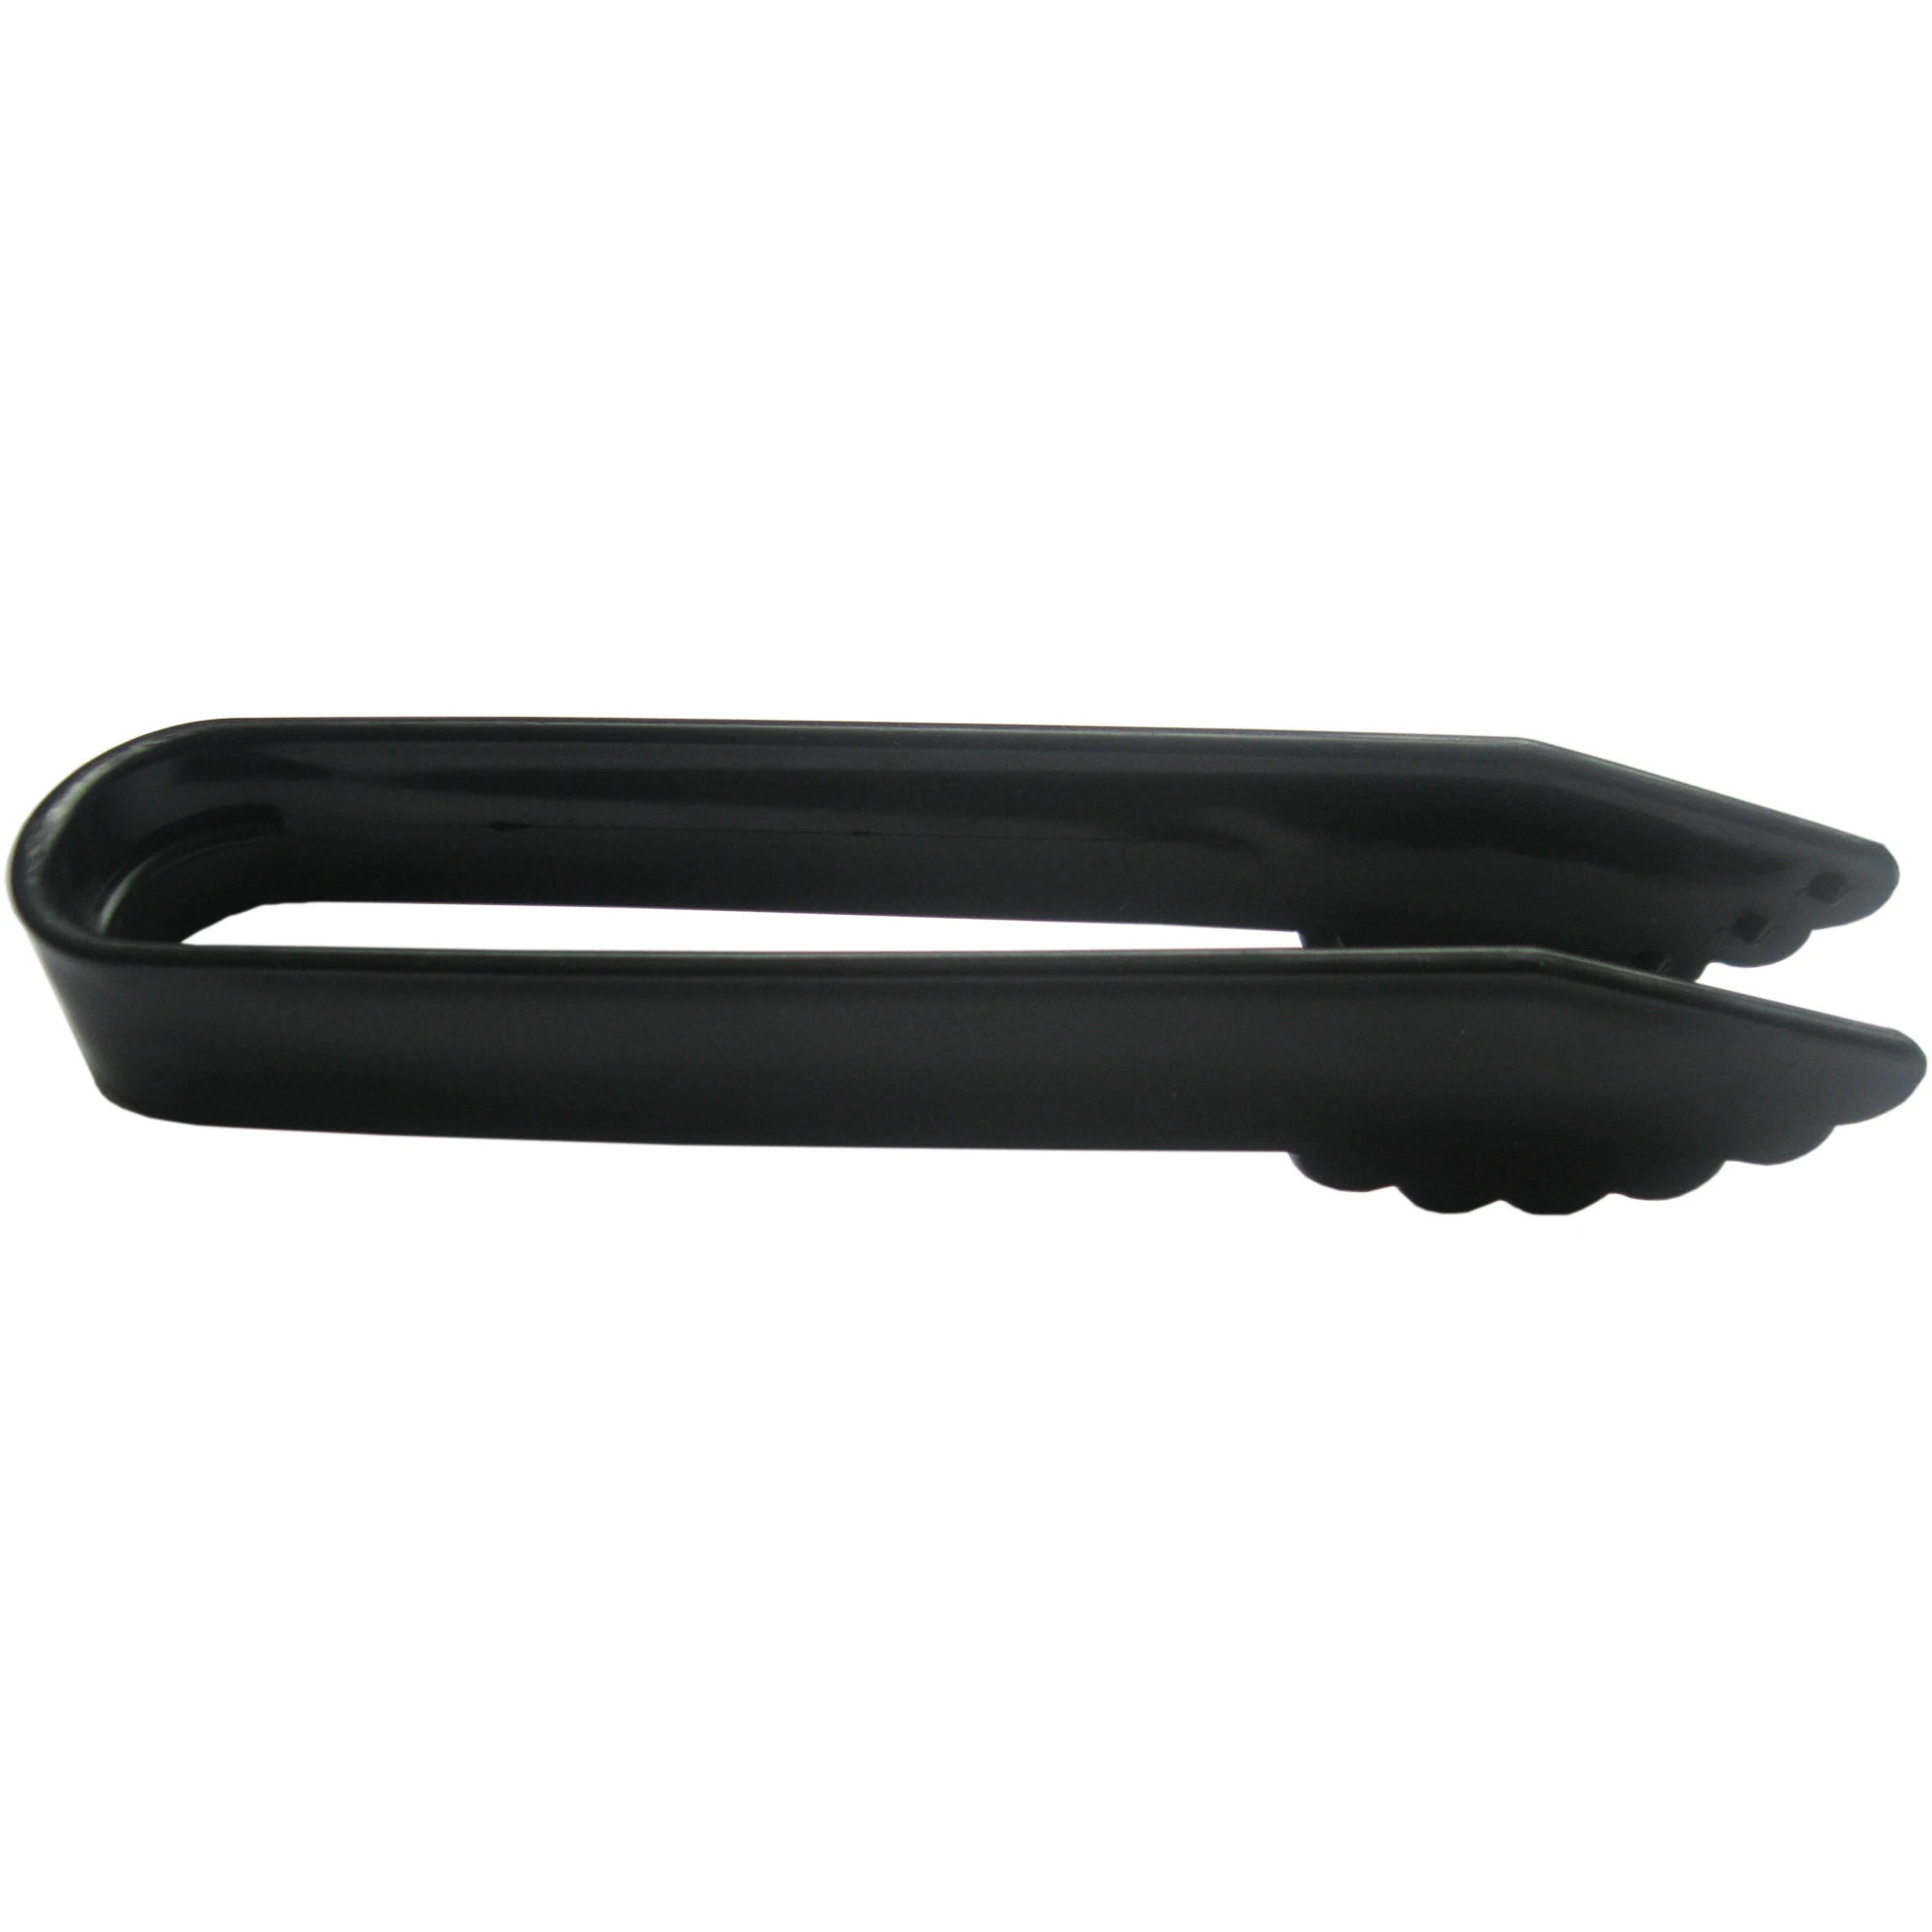 Durable Pp Plastic Food Clip Alligator Clamps Serving Tongs Buy Food Gripper,Plastic Food Clip,Plastic Food Tongs Product on Alibaba.com